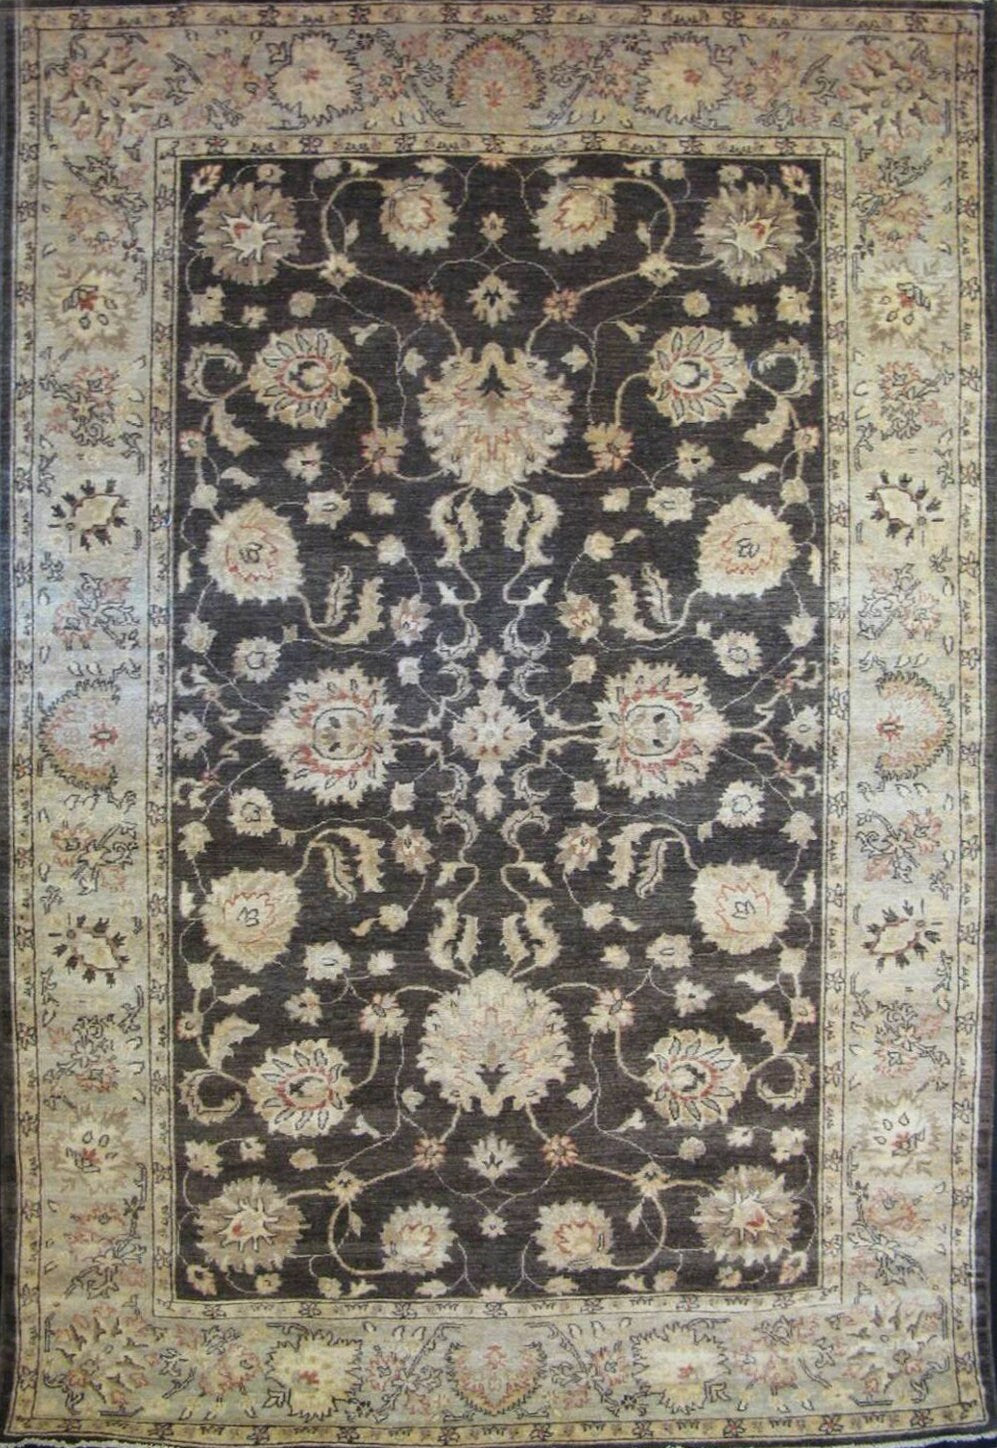 Faryab Wool Carpet | 8'11" x 6'2" | Home Decor | Hand-knotted Wool Area Rug